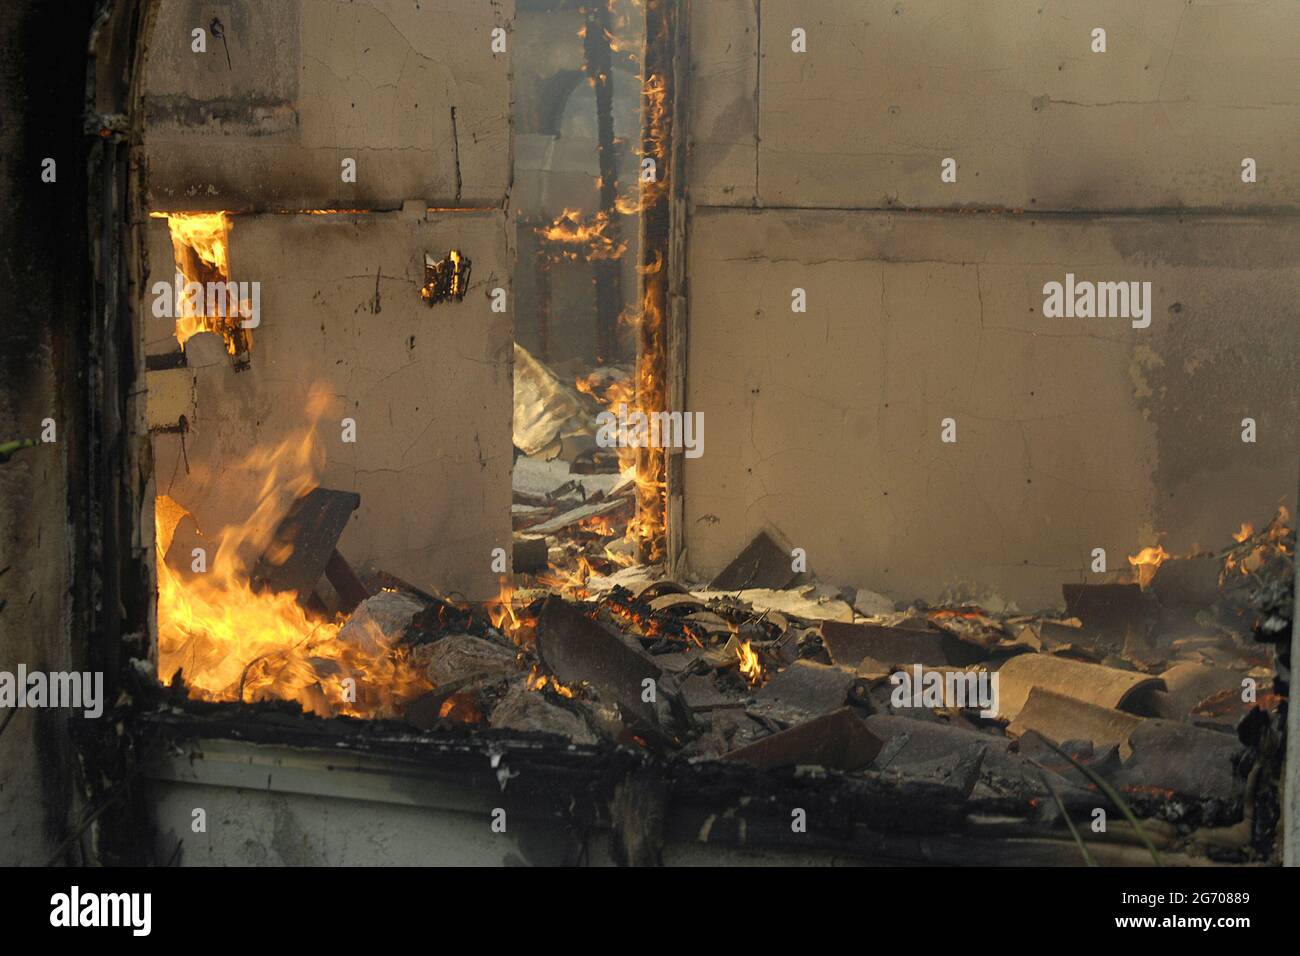 Interior of home, reduced to ashes, Witch Creek Fire, near San Diego, California. Stock Photo